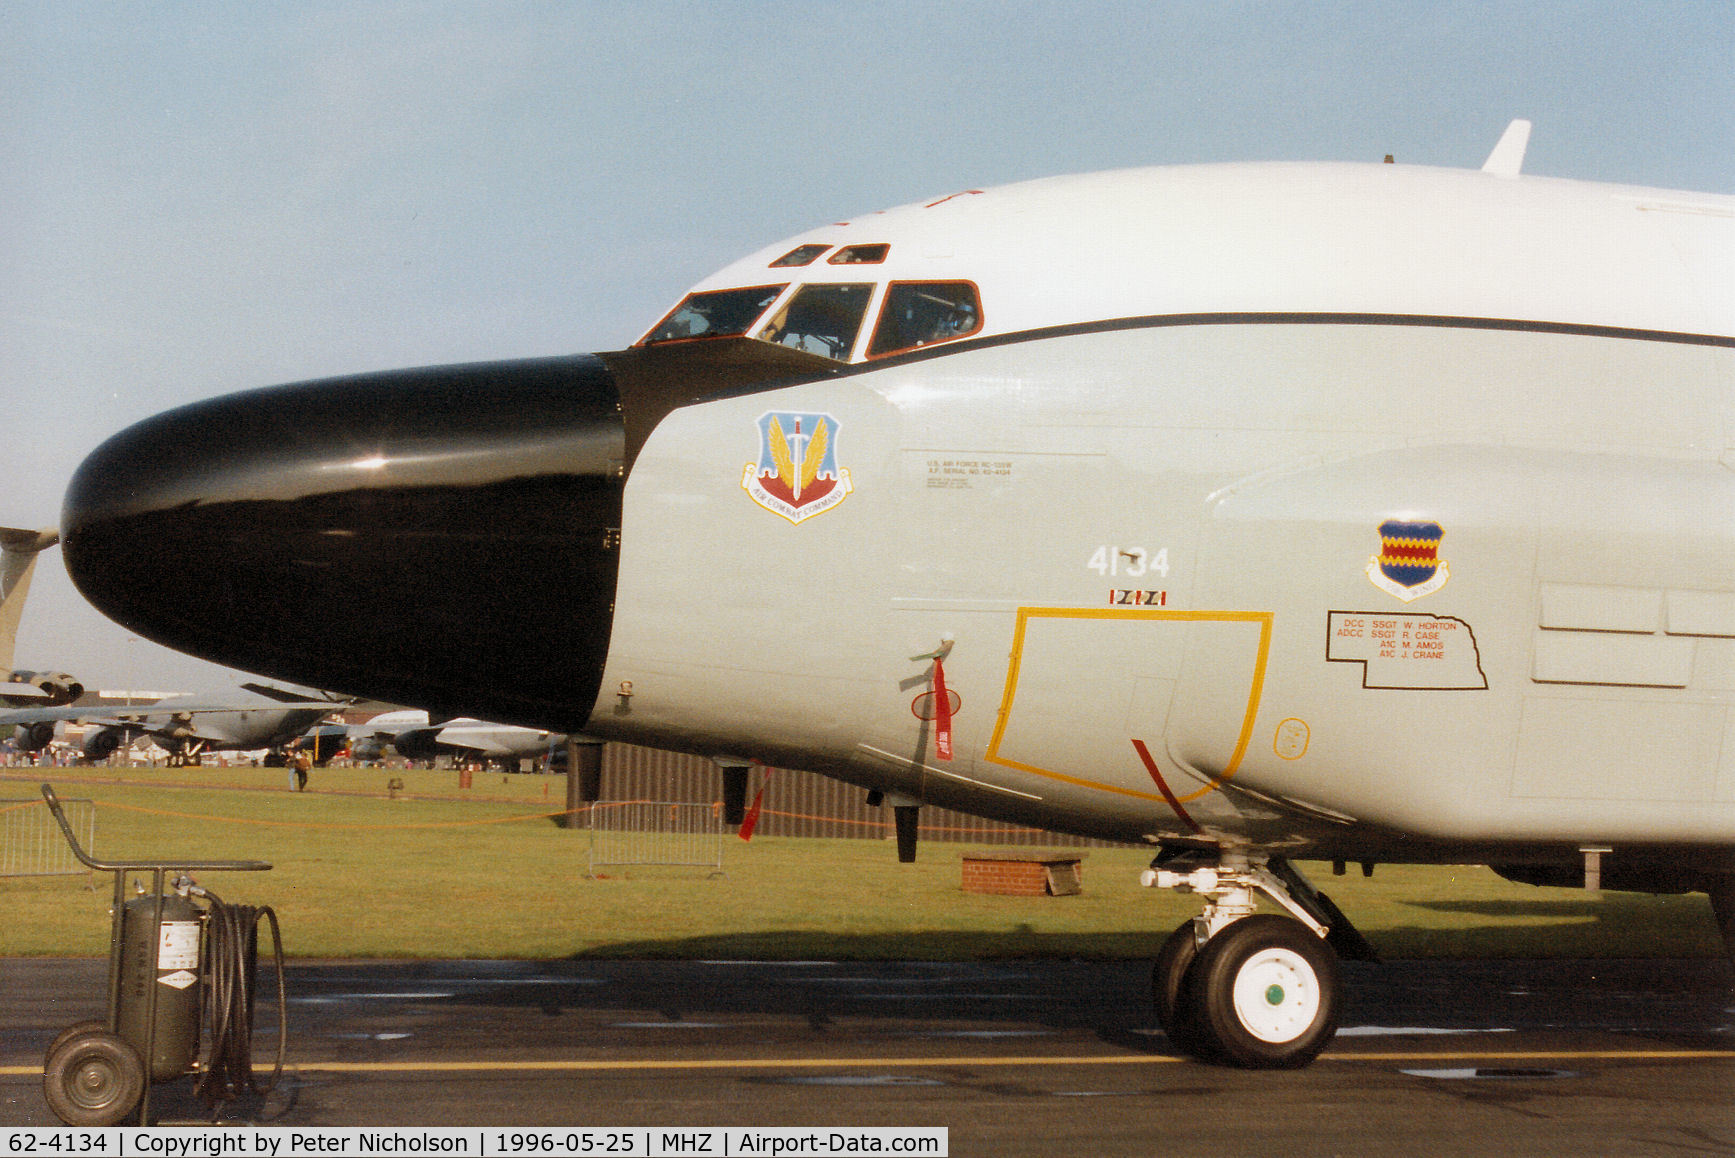 62-4134, 1962 Boeing RC-135W Rivet Joint C/N 18474, Rivet Joint intelligence version of the KC-135 Stratotanker of 55th Wing on display at the 1996 RAF Mildenhall Air Fete